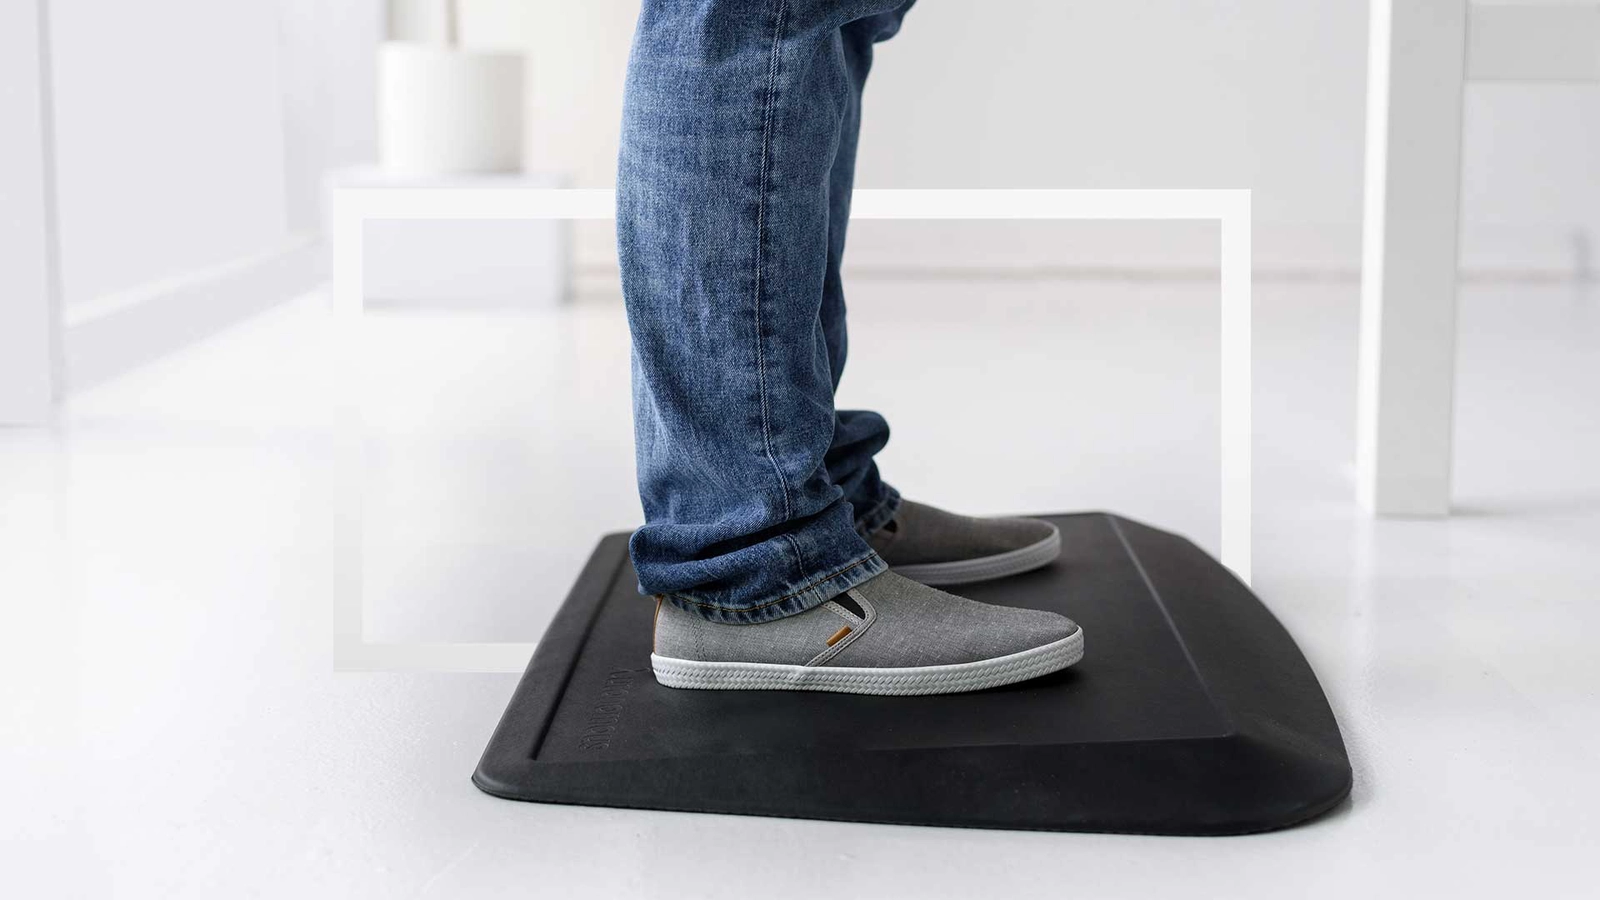 5 of the Best Anti-Fatigue Mats for Your Office